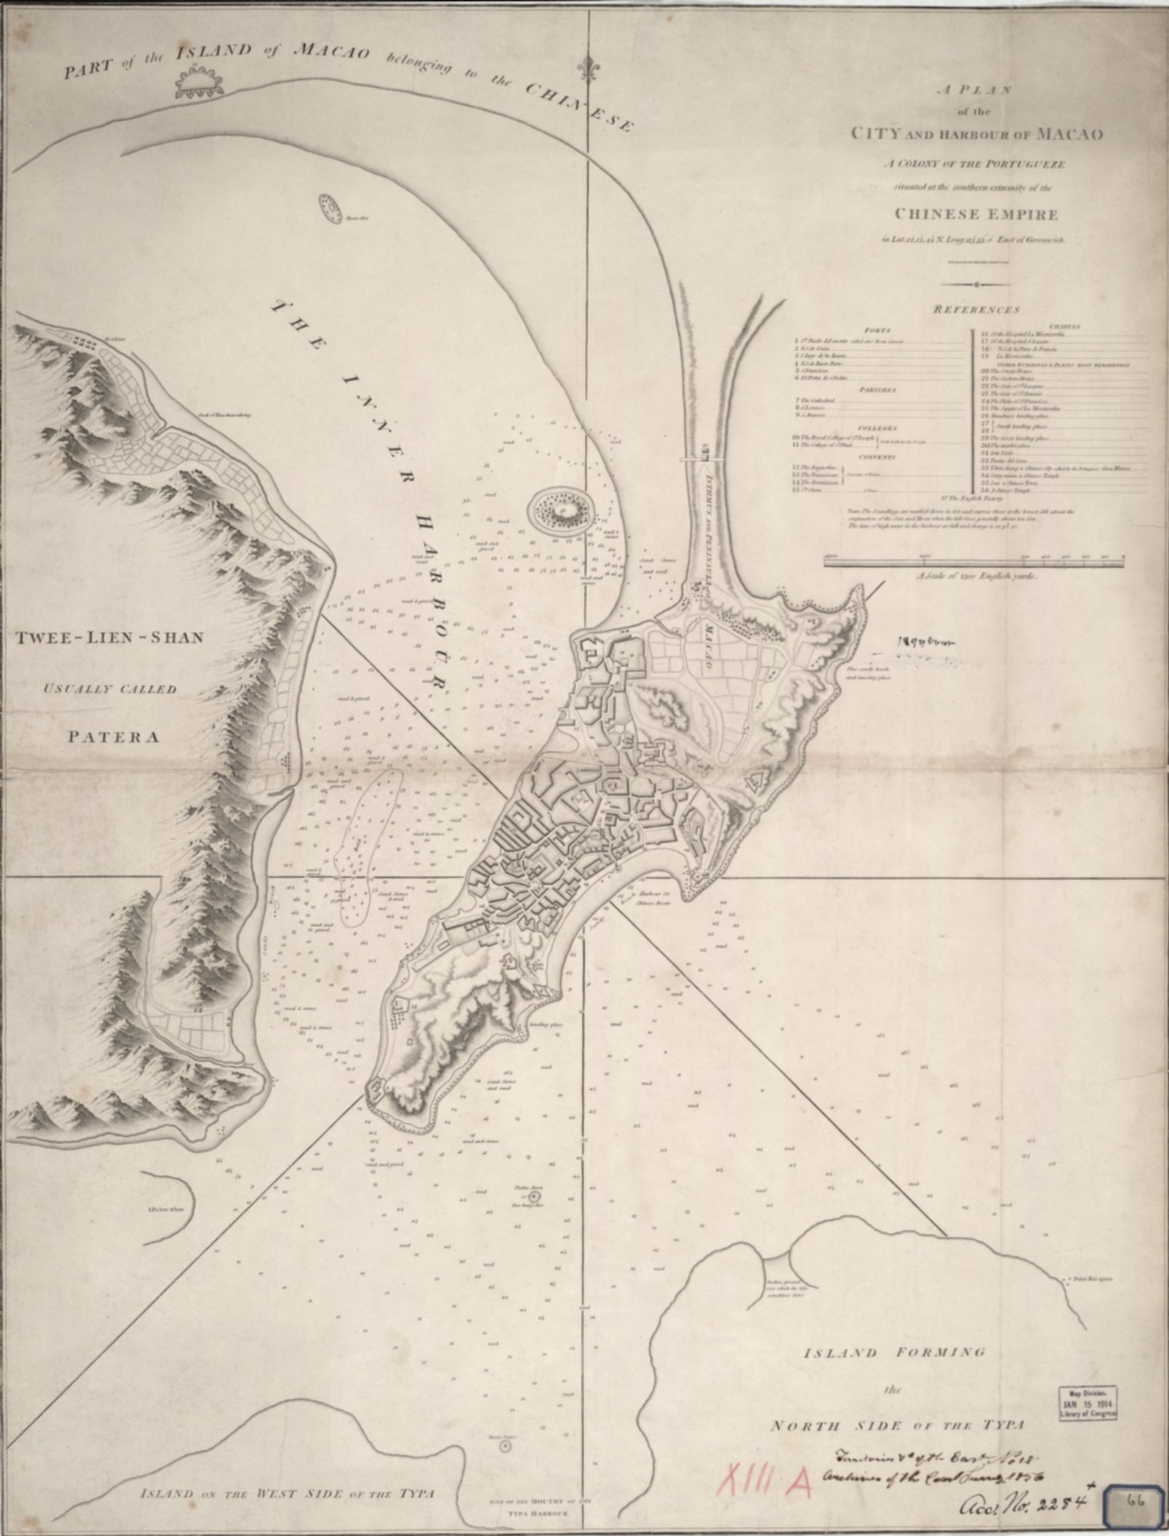 A plan of the city and harbour of Macao : a colony of the Portugueze situated at the southern extremity of the Chinese Empire in Lat. 22 ⁰12ʹ44ʺ N., Long. 113⁰35ʹ0ʺ east of Greenwich